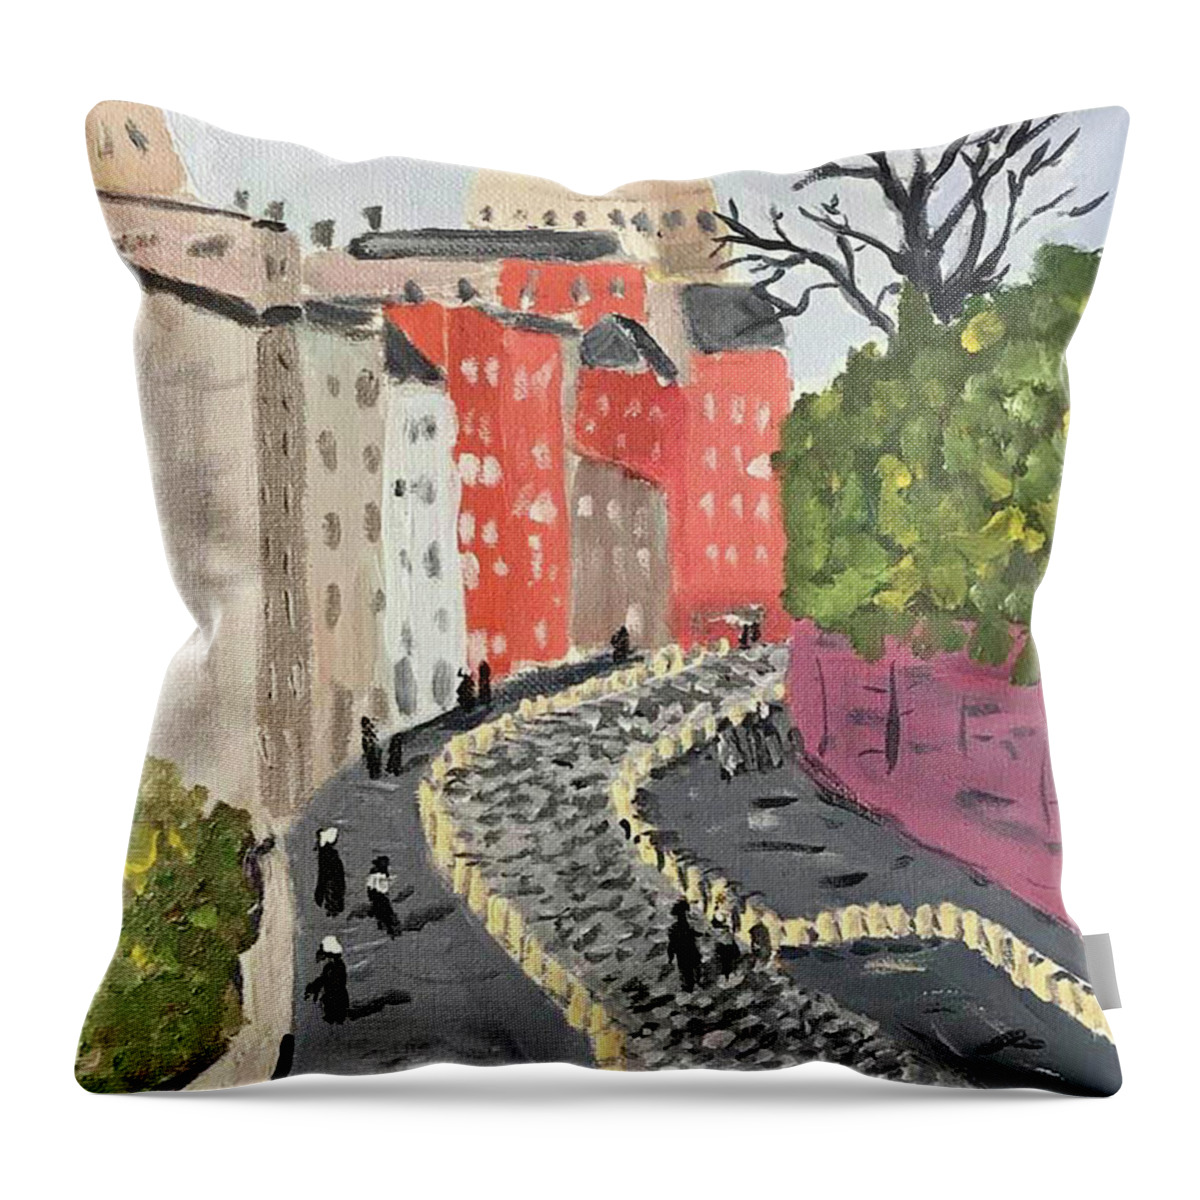  Throw Pillow featuring the painting Montmartre 7 by John Macarthur